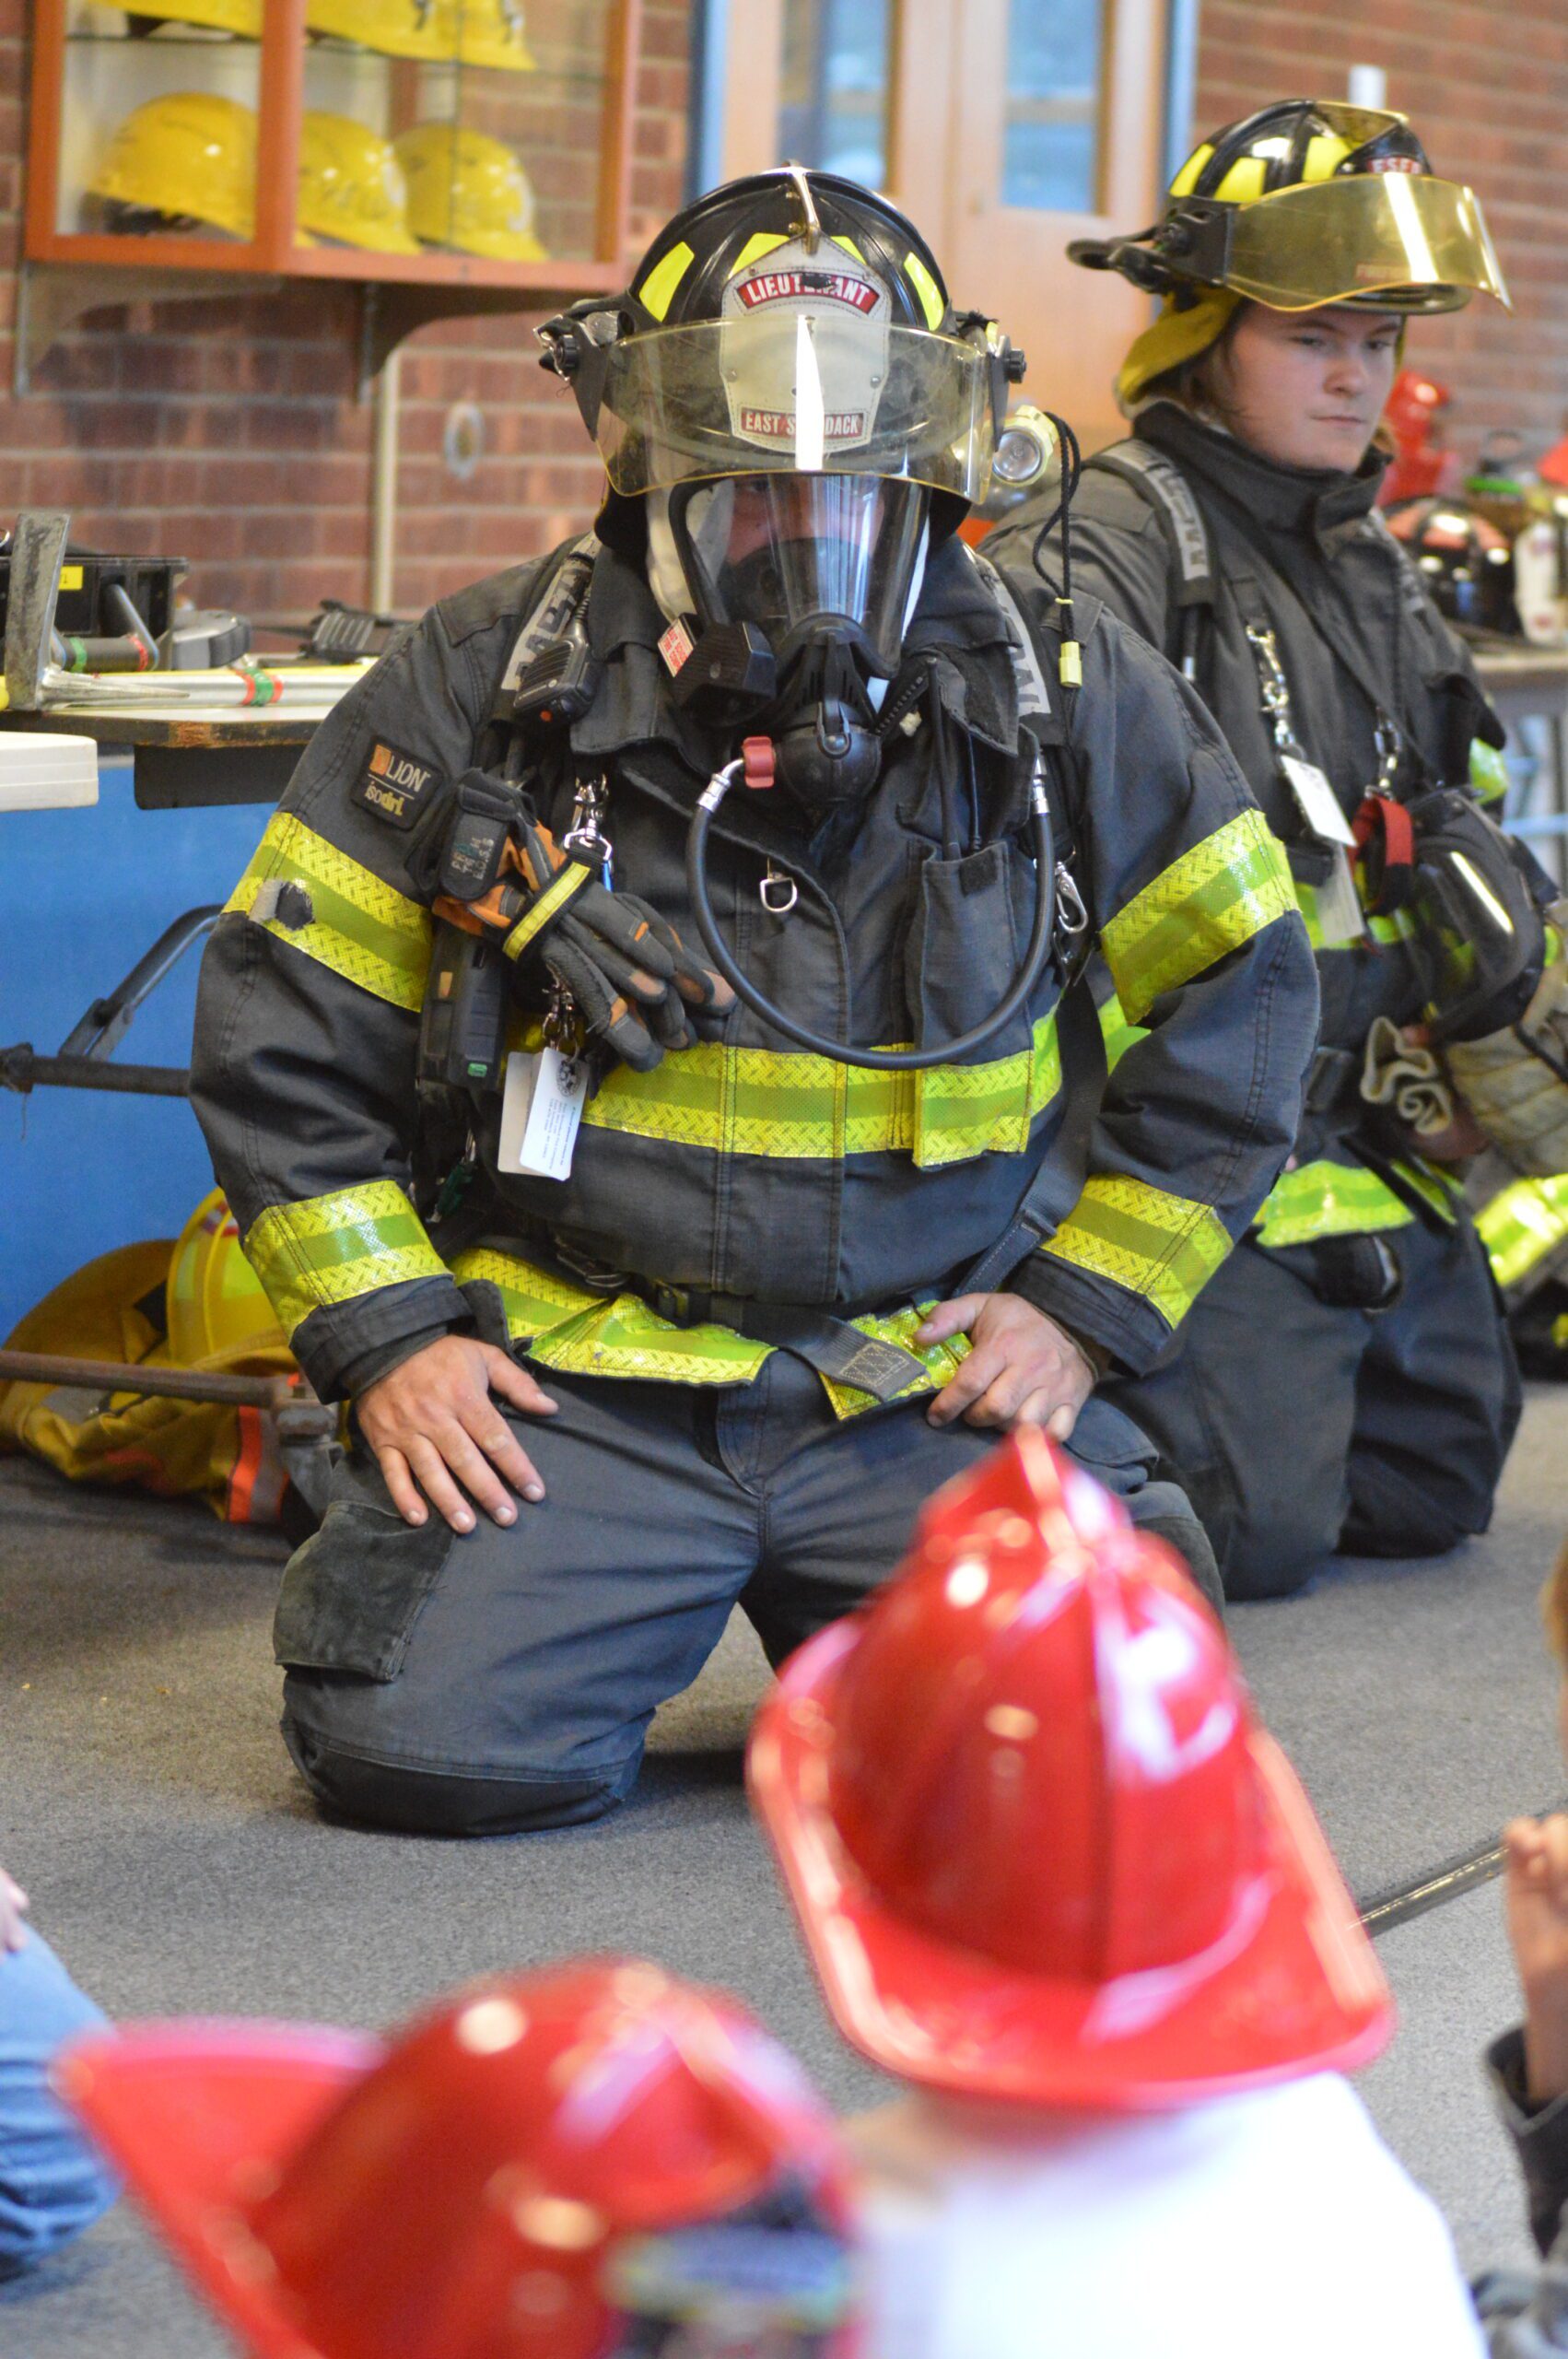 Firefighters lead fire safety talks with students.